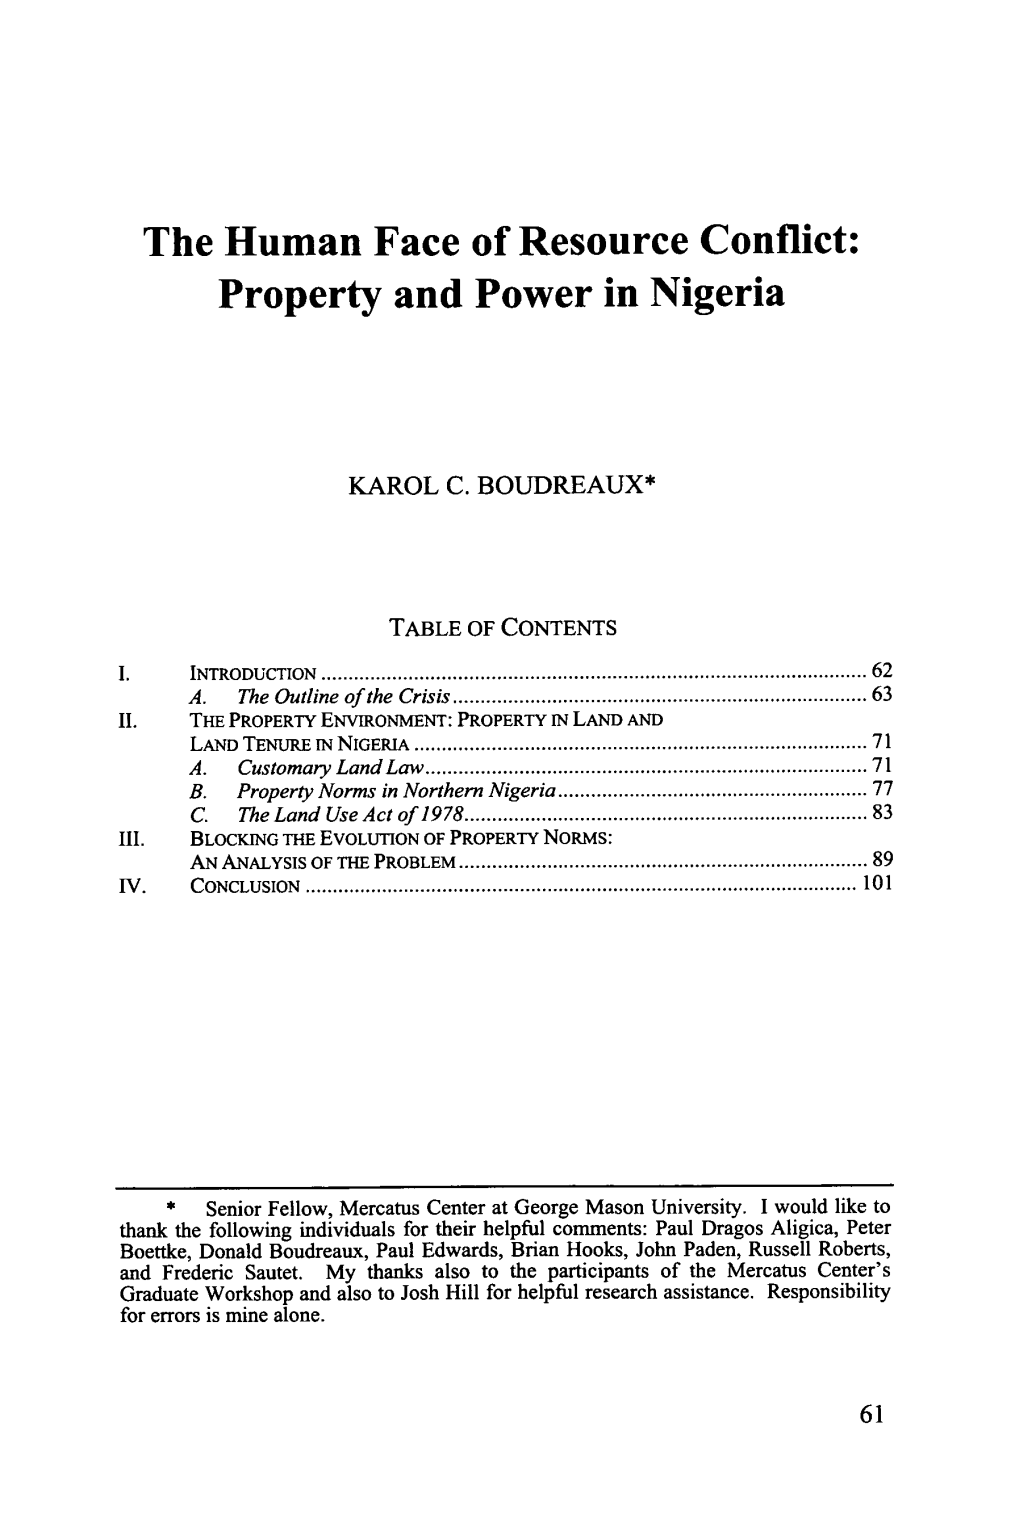 Human Face of Resource Conflict: Property and Power in Nigeria